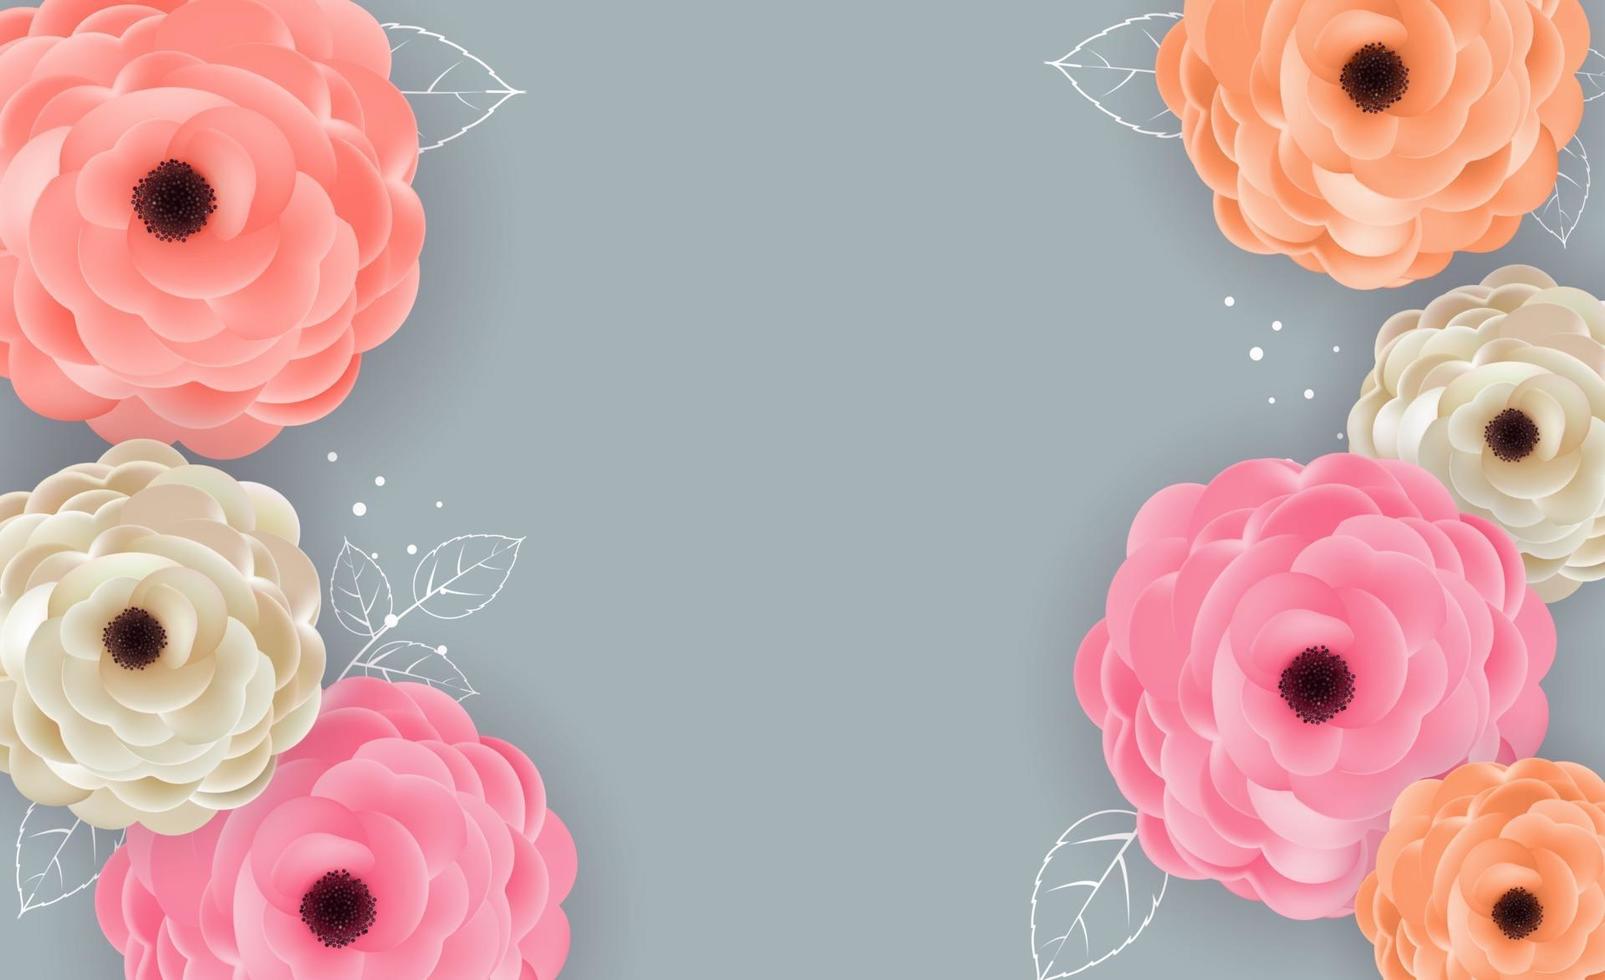 Background Poster Natural Flowers and Leaves Template. Vector Illustration